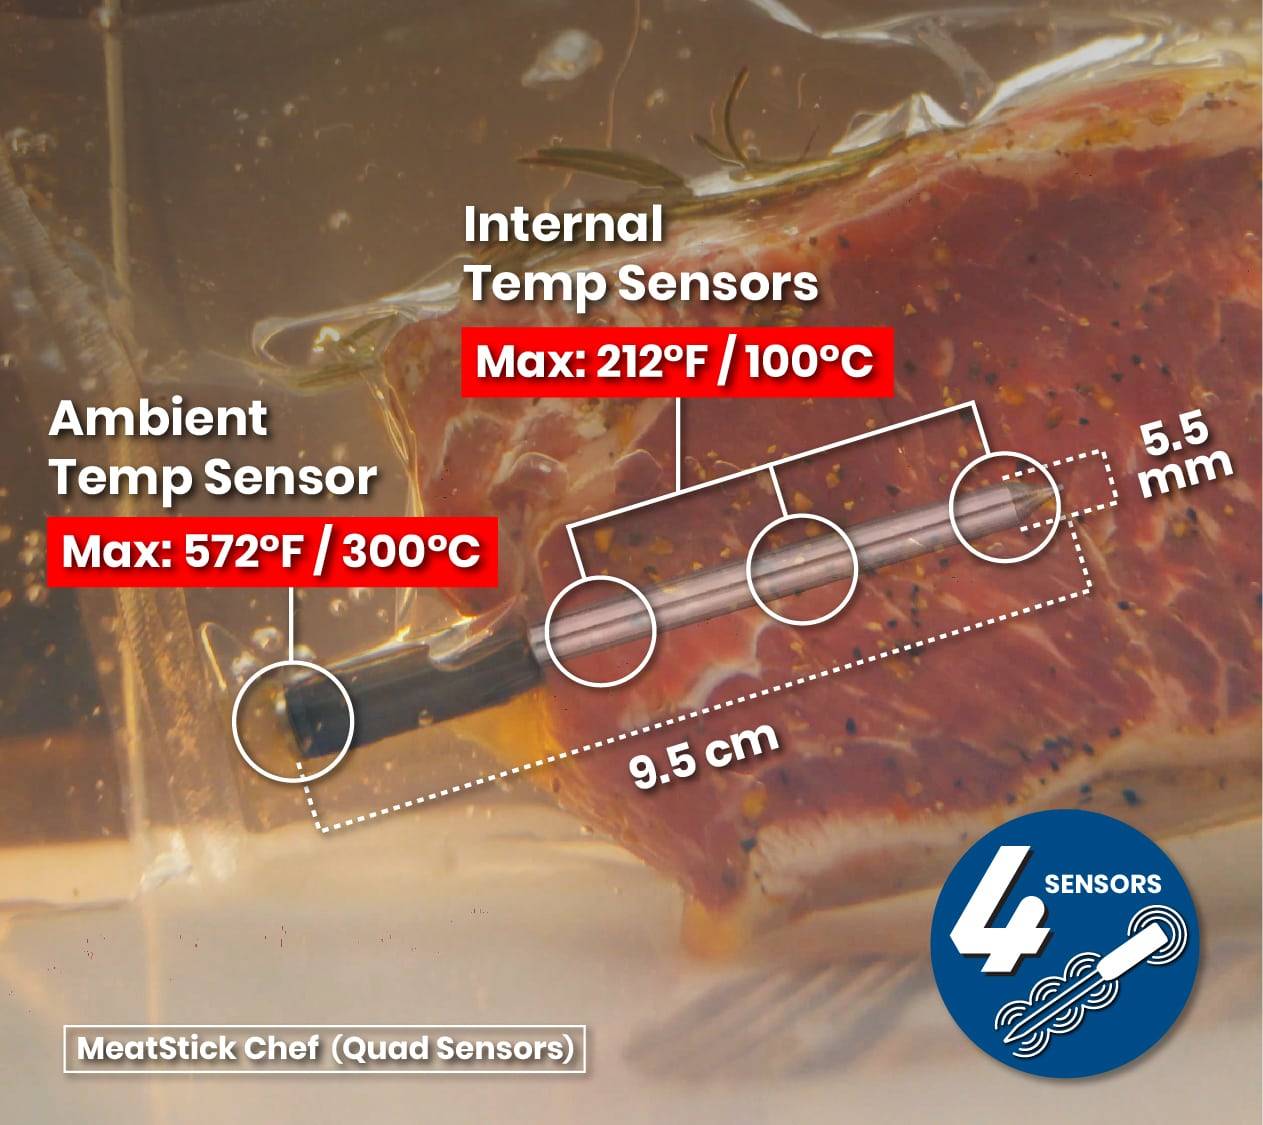 The MeatStick Chef: The Smallest Wireless Meat Thermometer with Quad Sensors